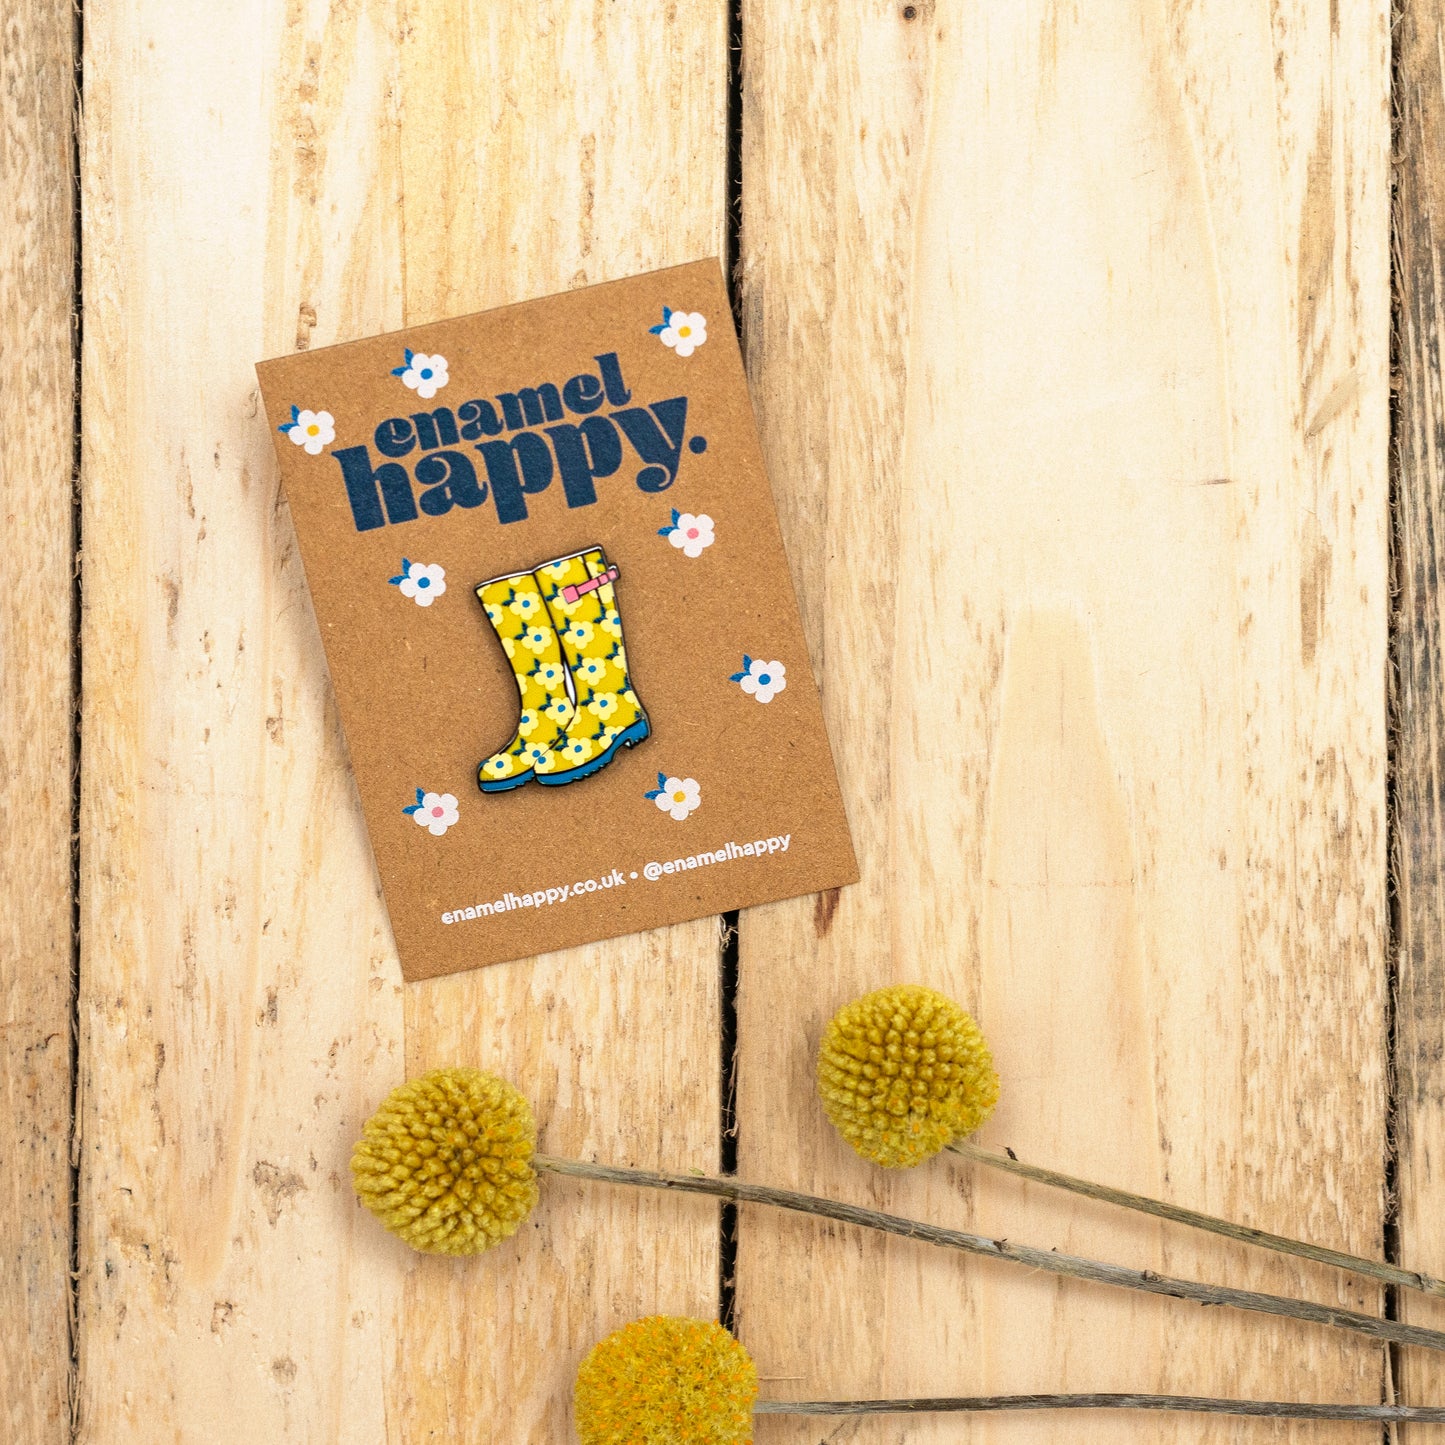 Honey Yellow Floral Welly Boots Wellies Hard Enamel Pin Badge - Such a Lovely Gardeners Gift Idea!